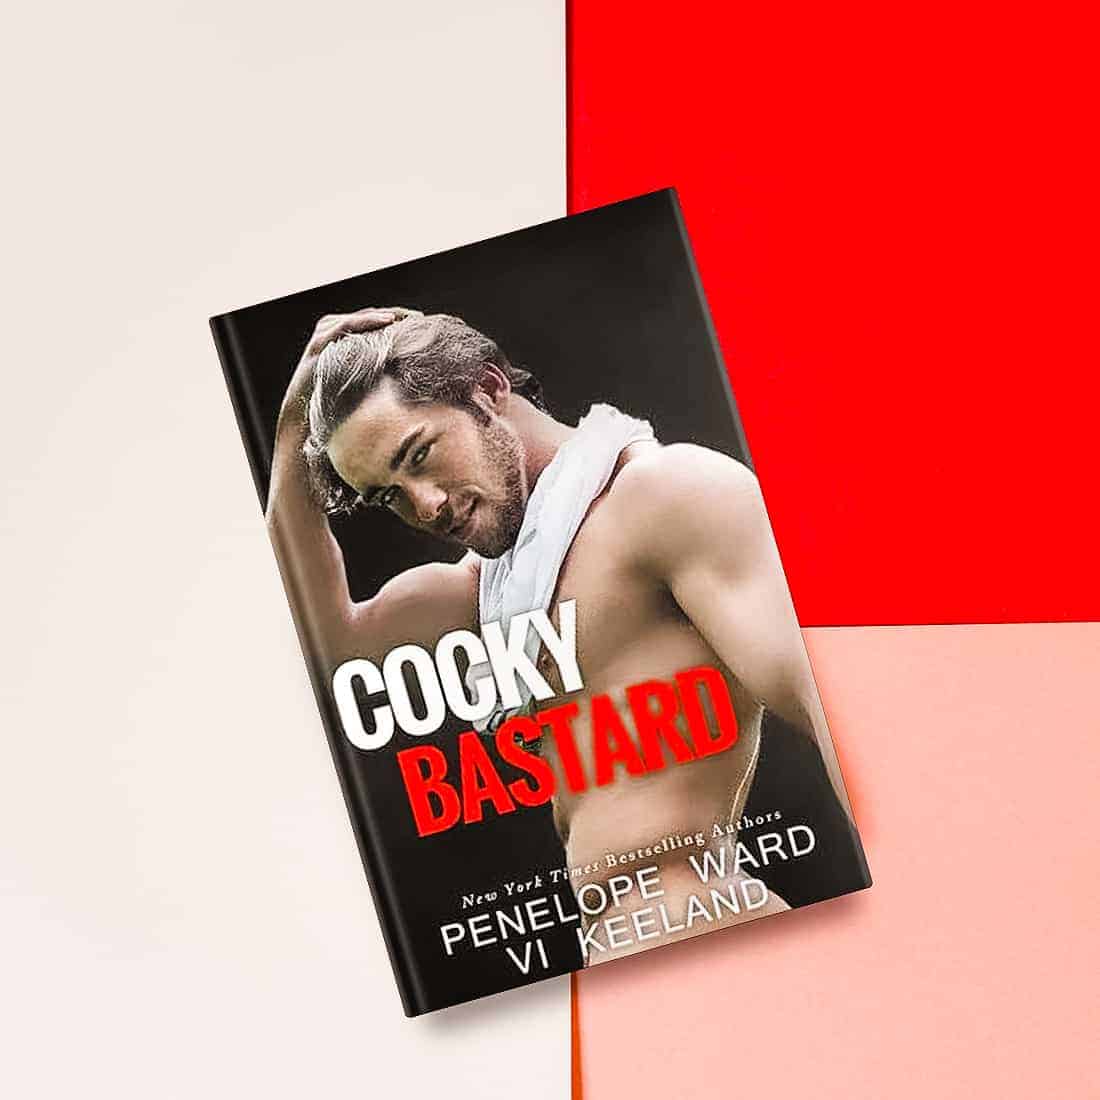 Cocky Bastard by Penelope Ward and Vi Keeland is a witty romantic comedy about a road trip and is filled with laugh-out-loud-funny moments and double entendres